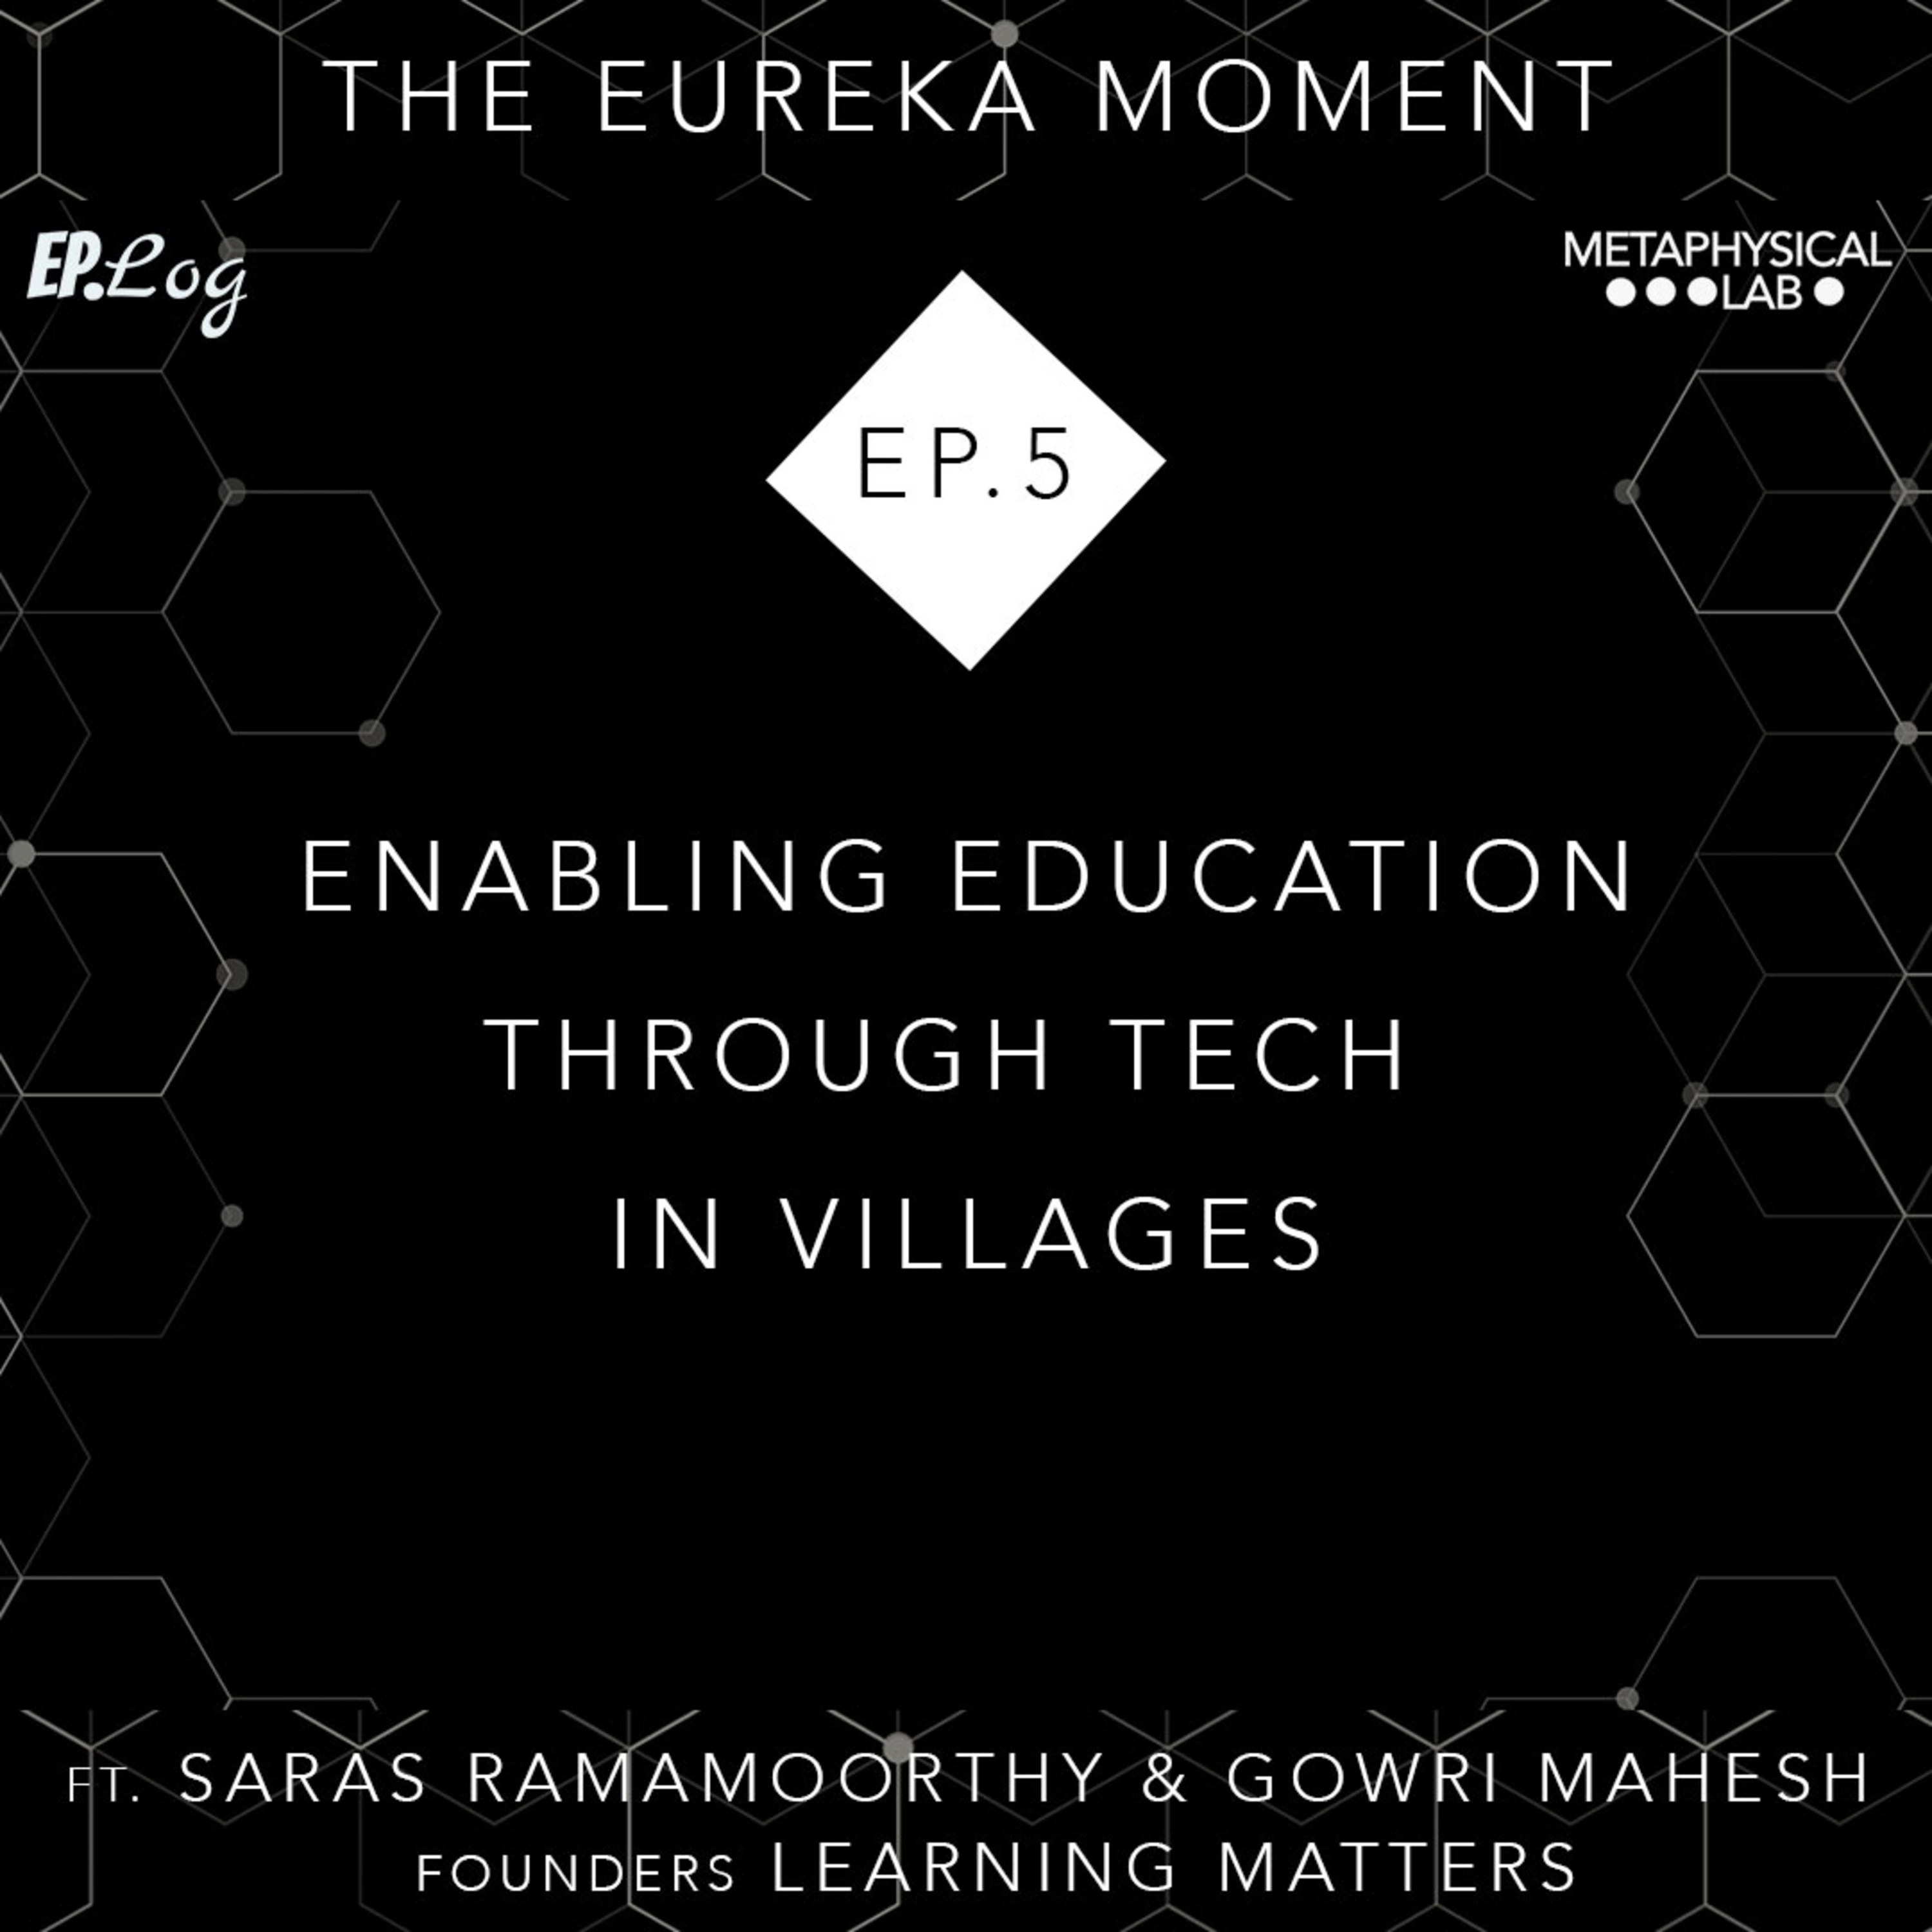 Ep.5 Enabling Education Through Tech In Villages ft. Saras & Gowri, Learning Matters